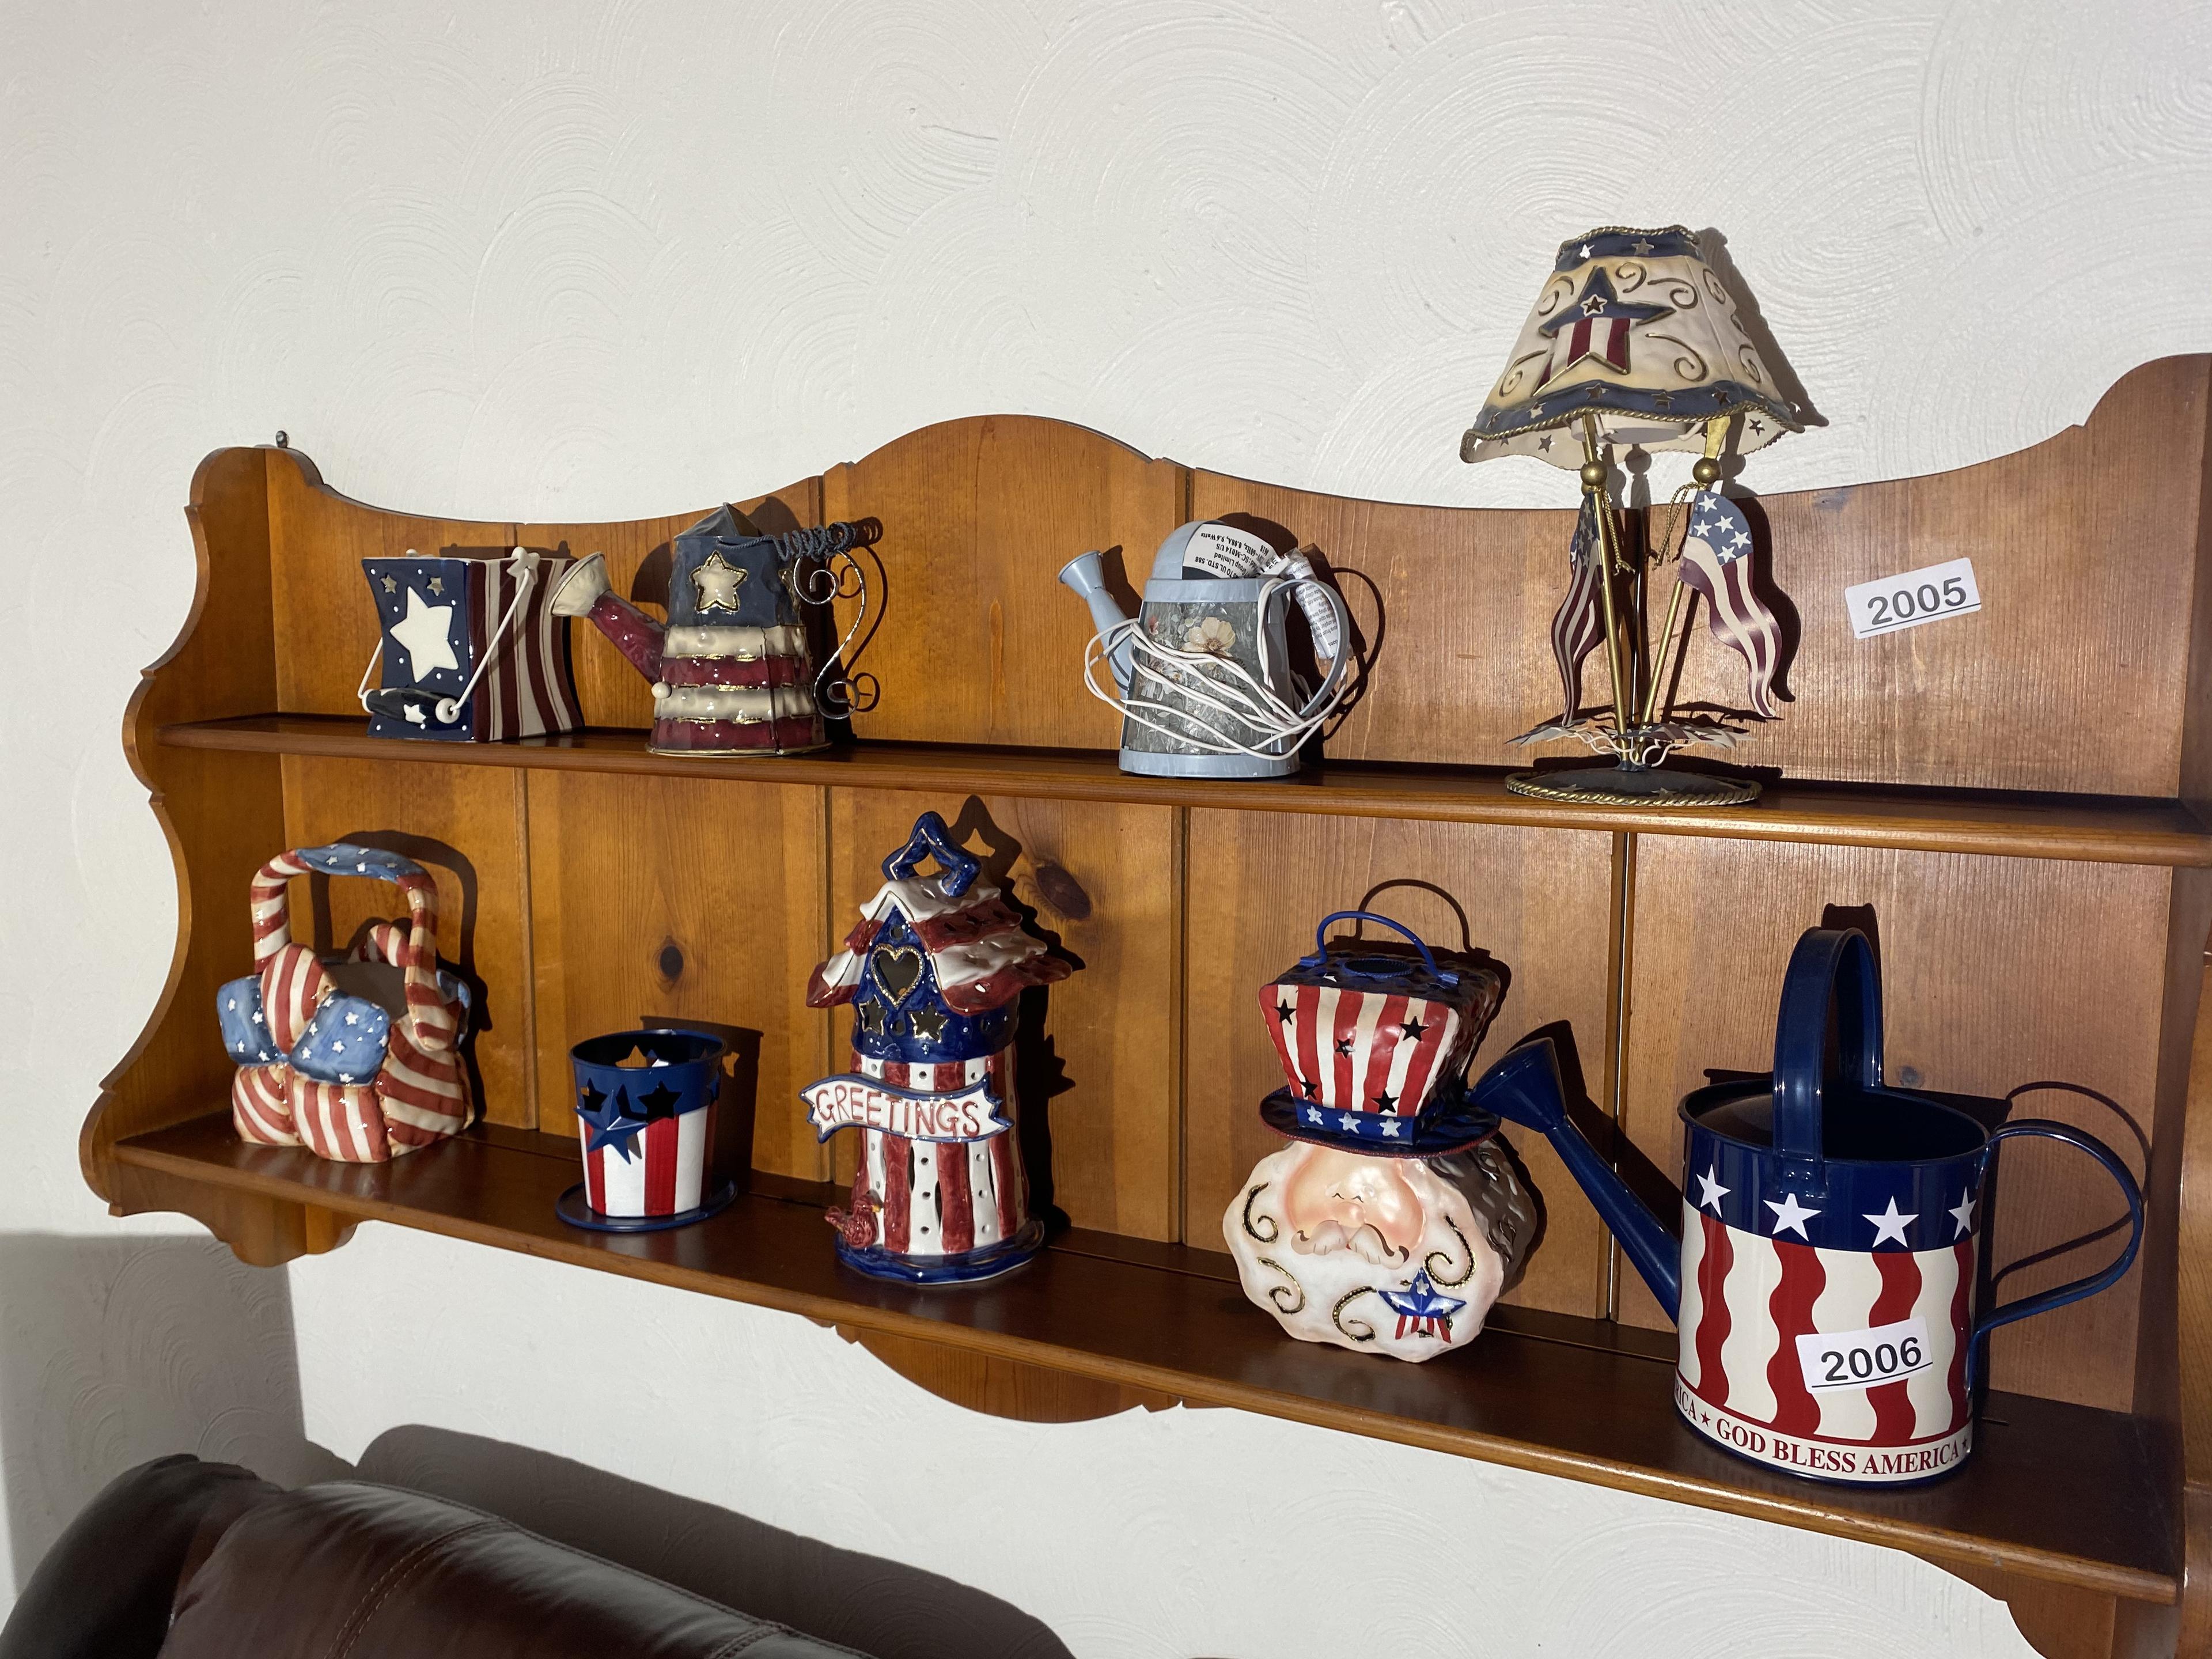 Patriotic items and more on shelves